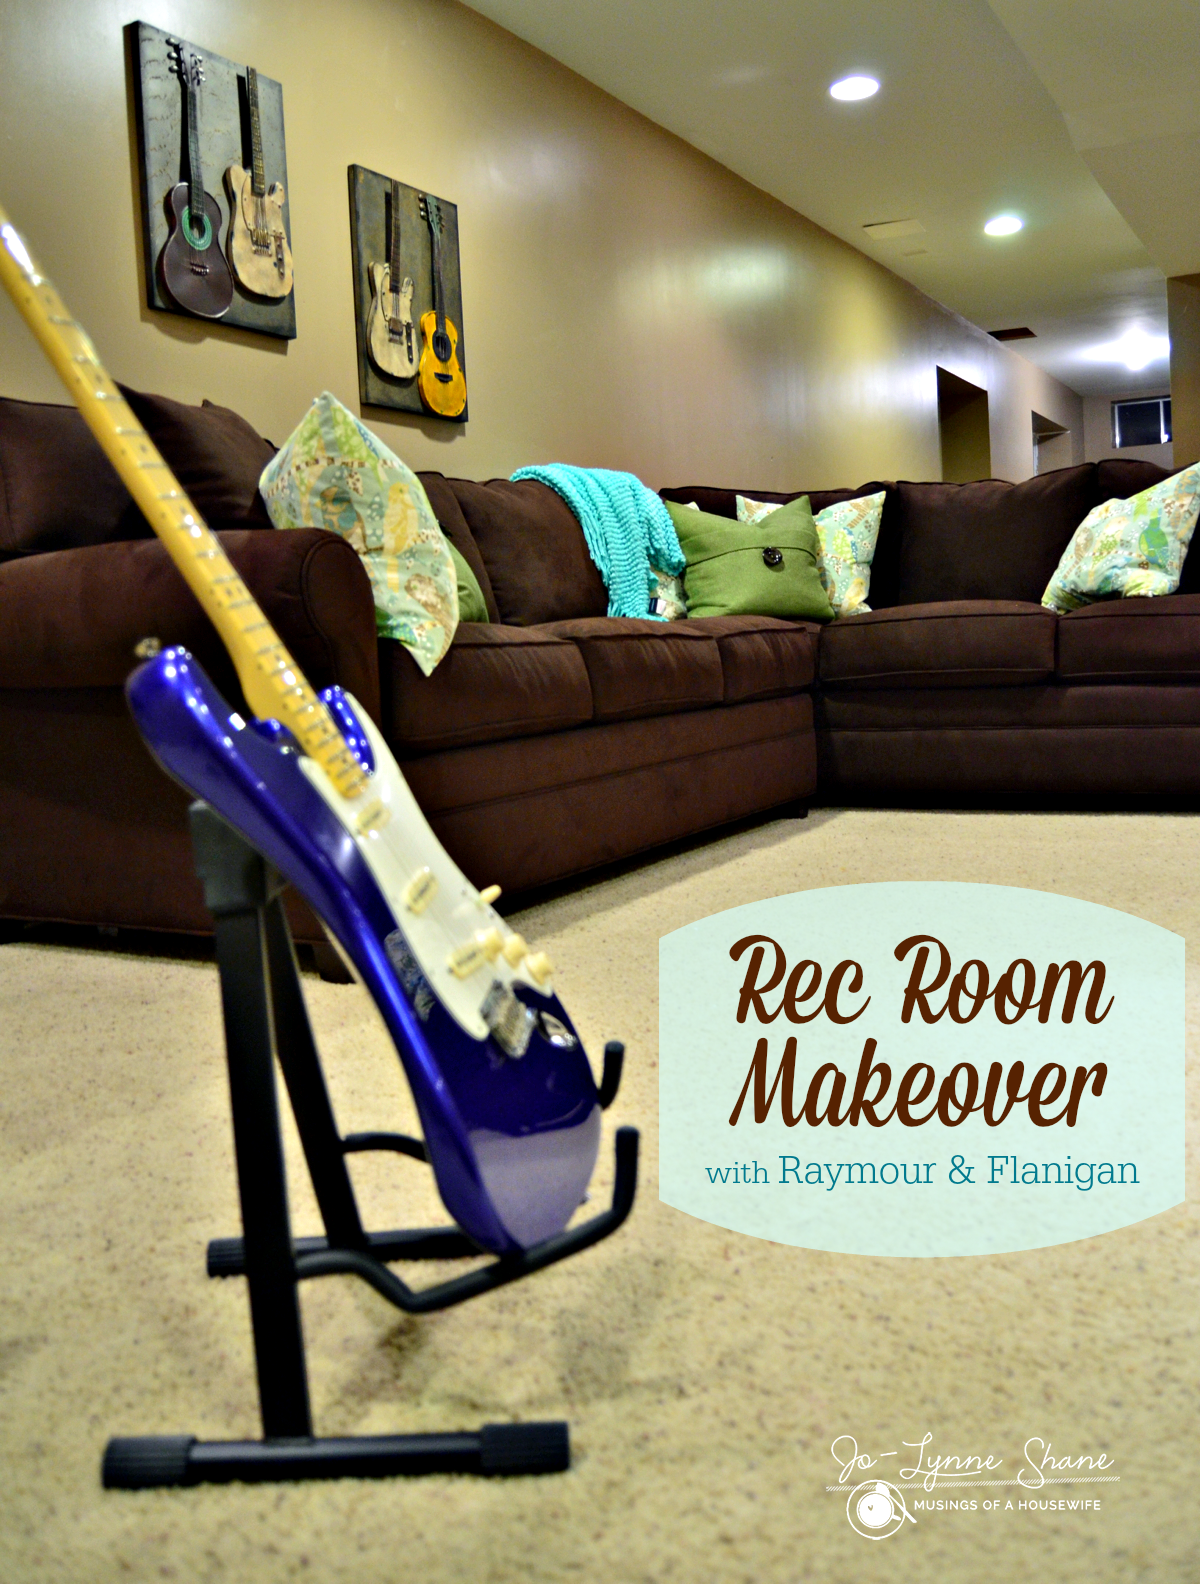 Rec Room Makeover with Raymour & Flanigan